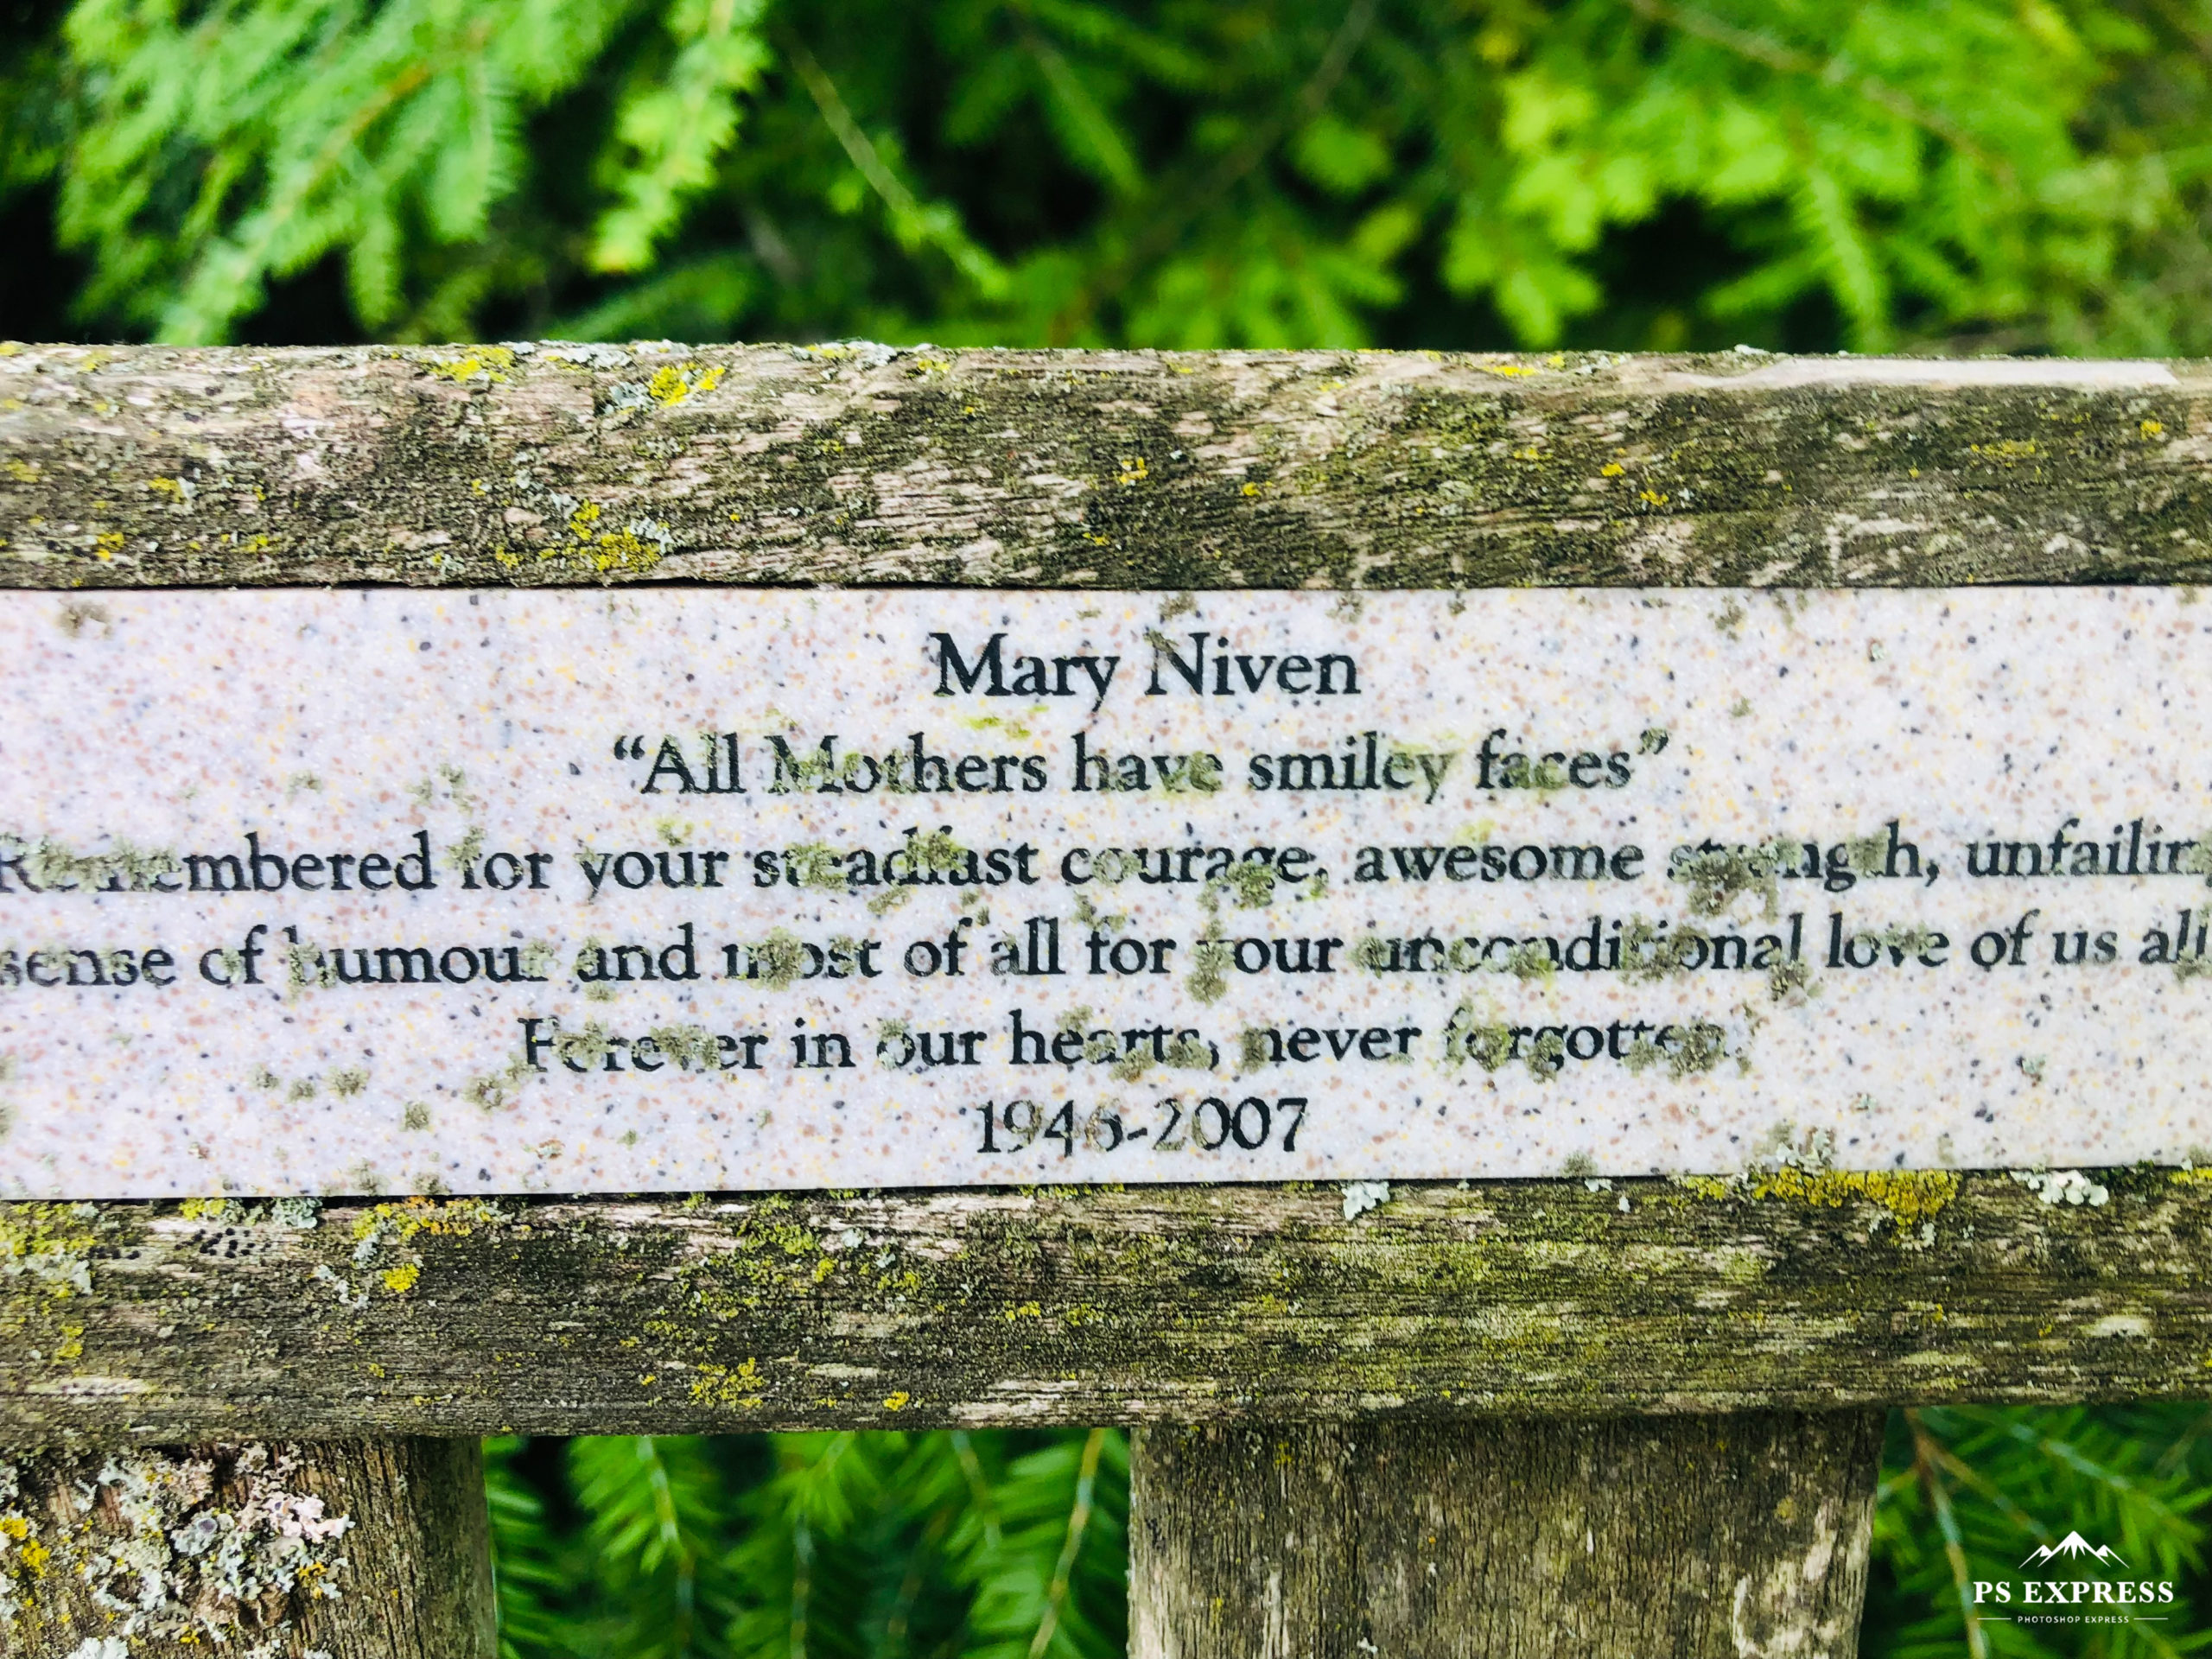 a colour photo of a bench plaque with moss growing on it that reads: 
Mary Niven
"All Mother's have smiley faces."
Remembered for their steadfast courage, awesome strength, unfailing humour, and most of all our unconditional love of us all. Forever in our hearts, never forgotten. 1946-2007